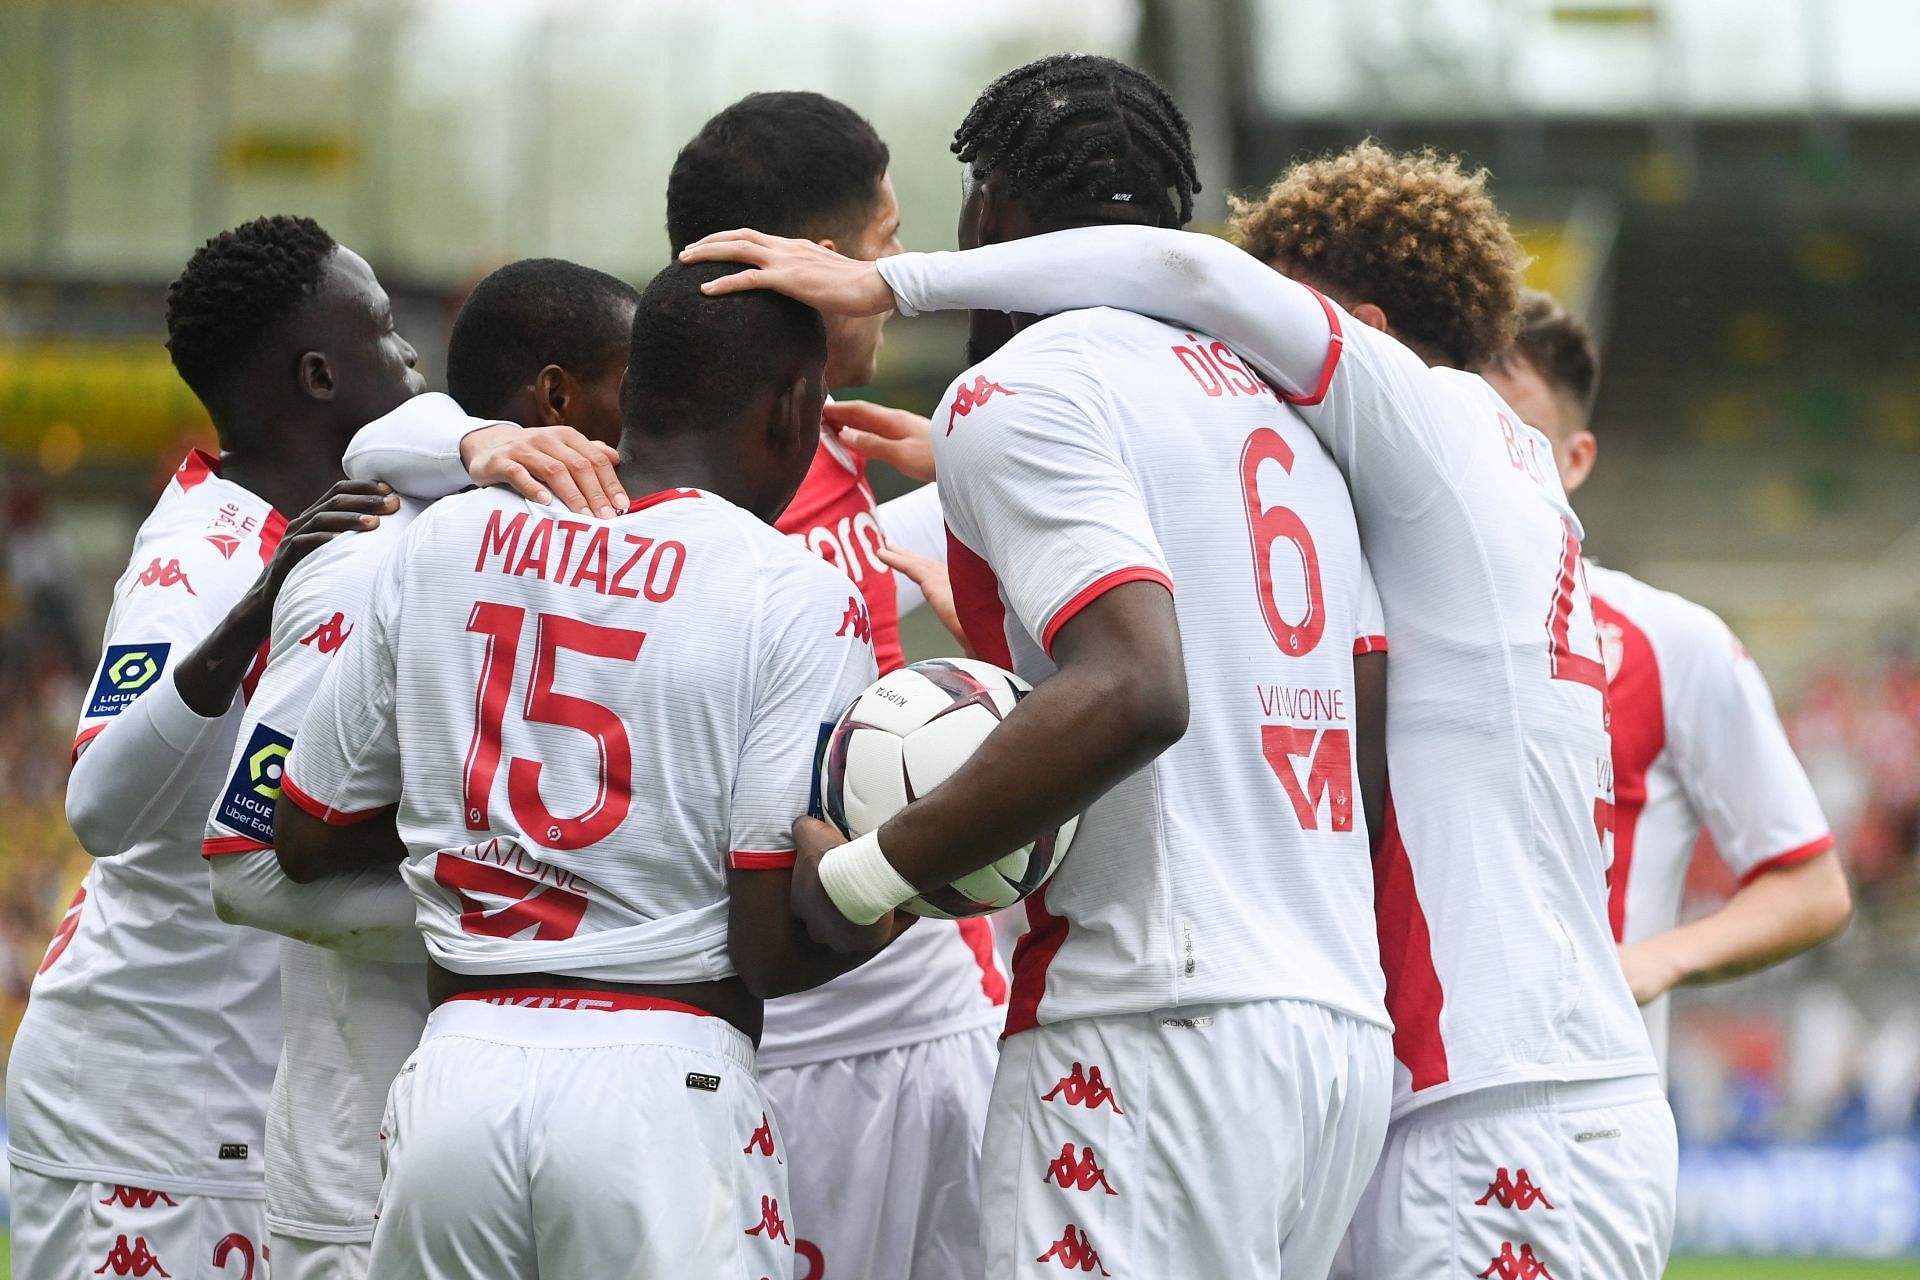 Monaco will face Lorient on Sunday - Ligue 1 